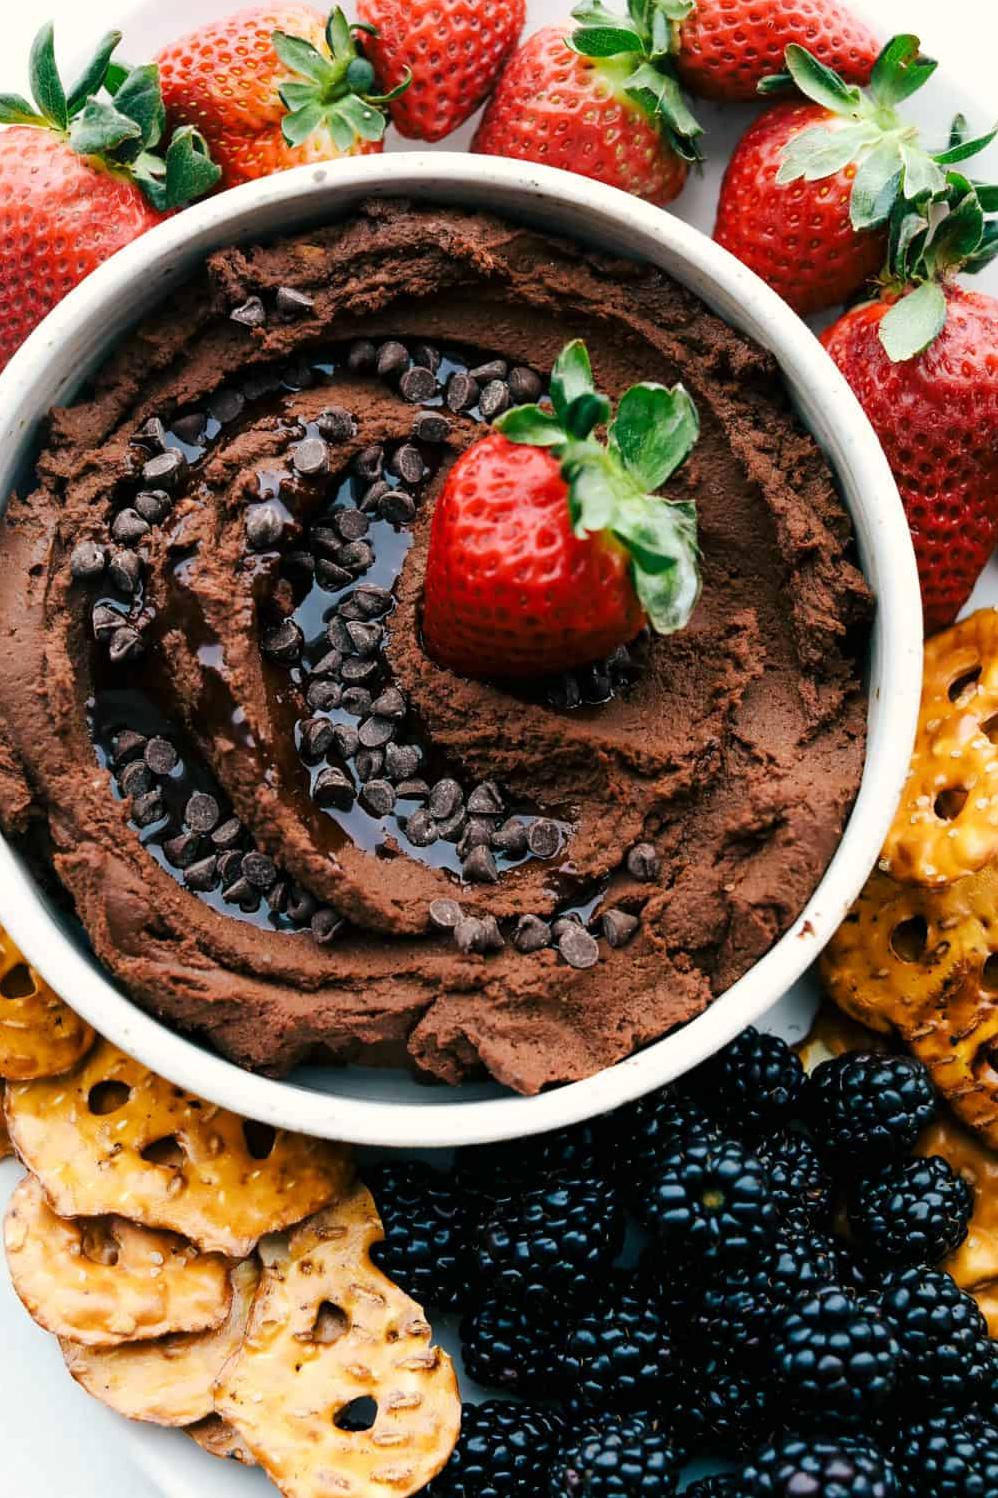  Sweet and savory come together in this delicious chocolate hummus.